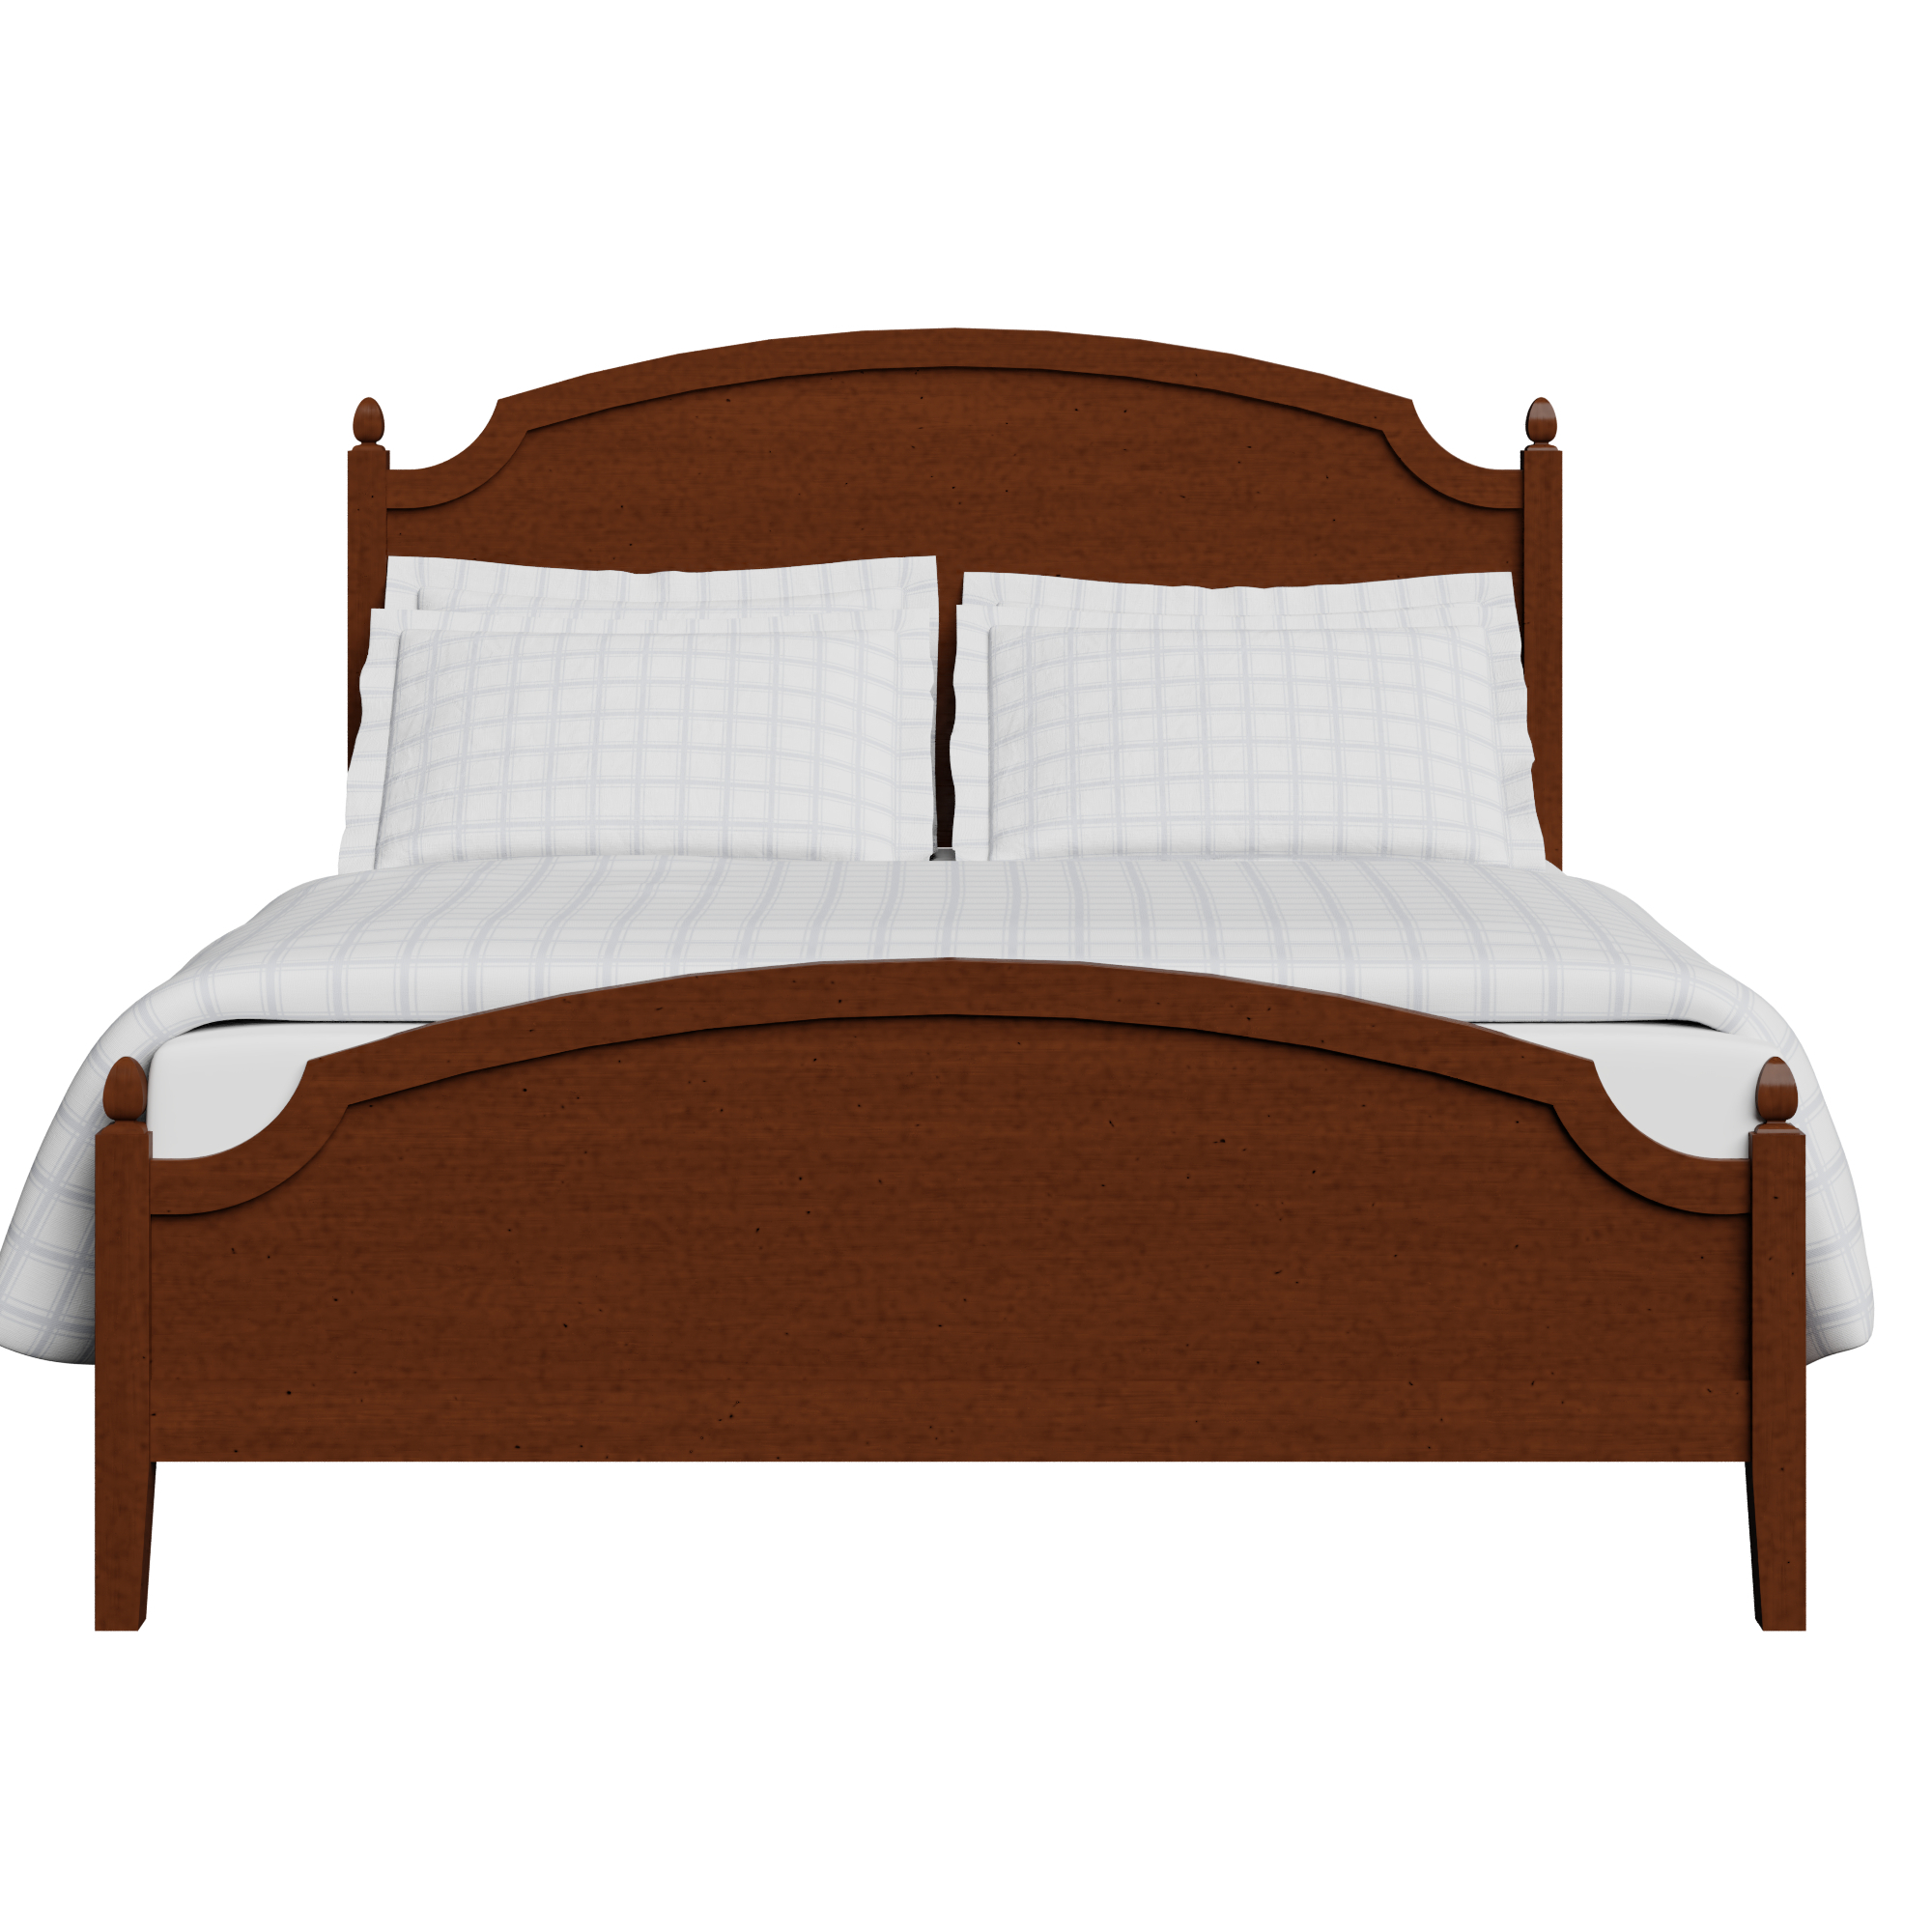 Kipling Low Footend Wooden Bed Frame, Small Full Size Bed Frame